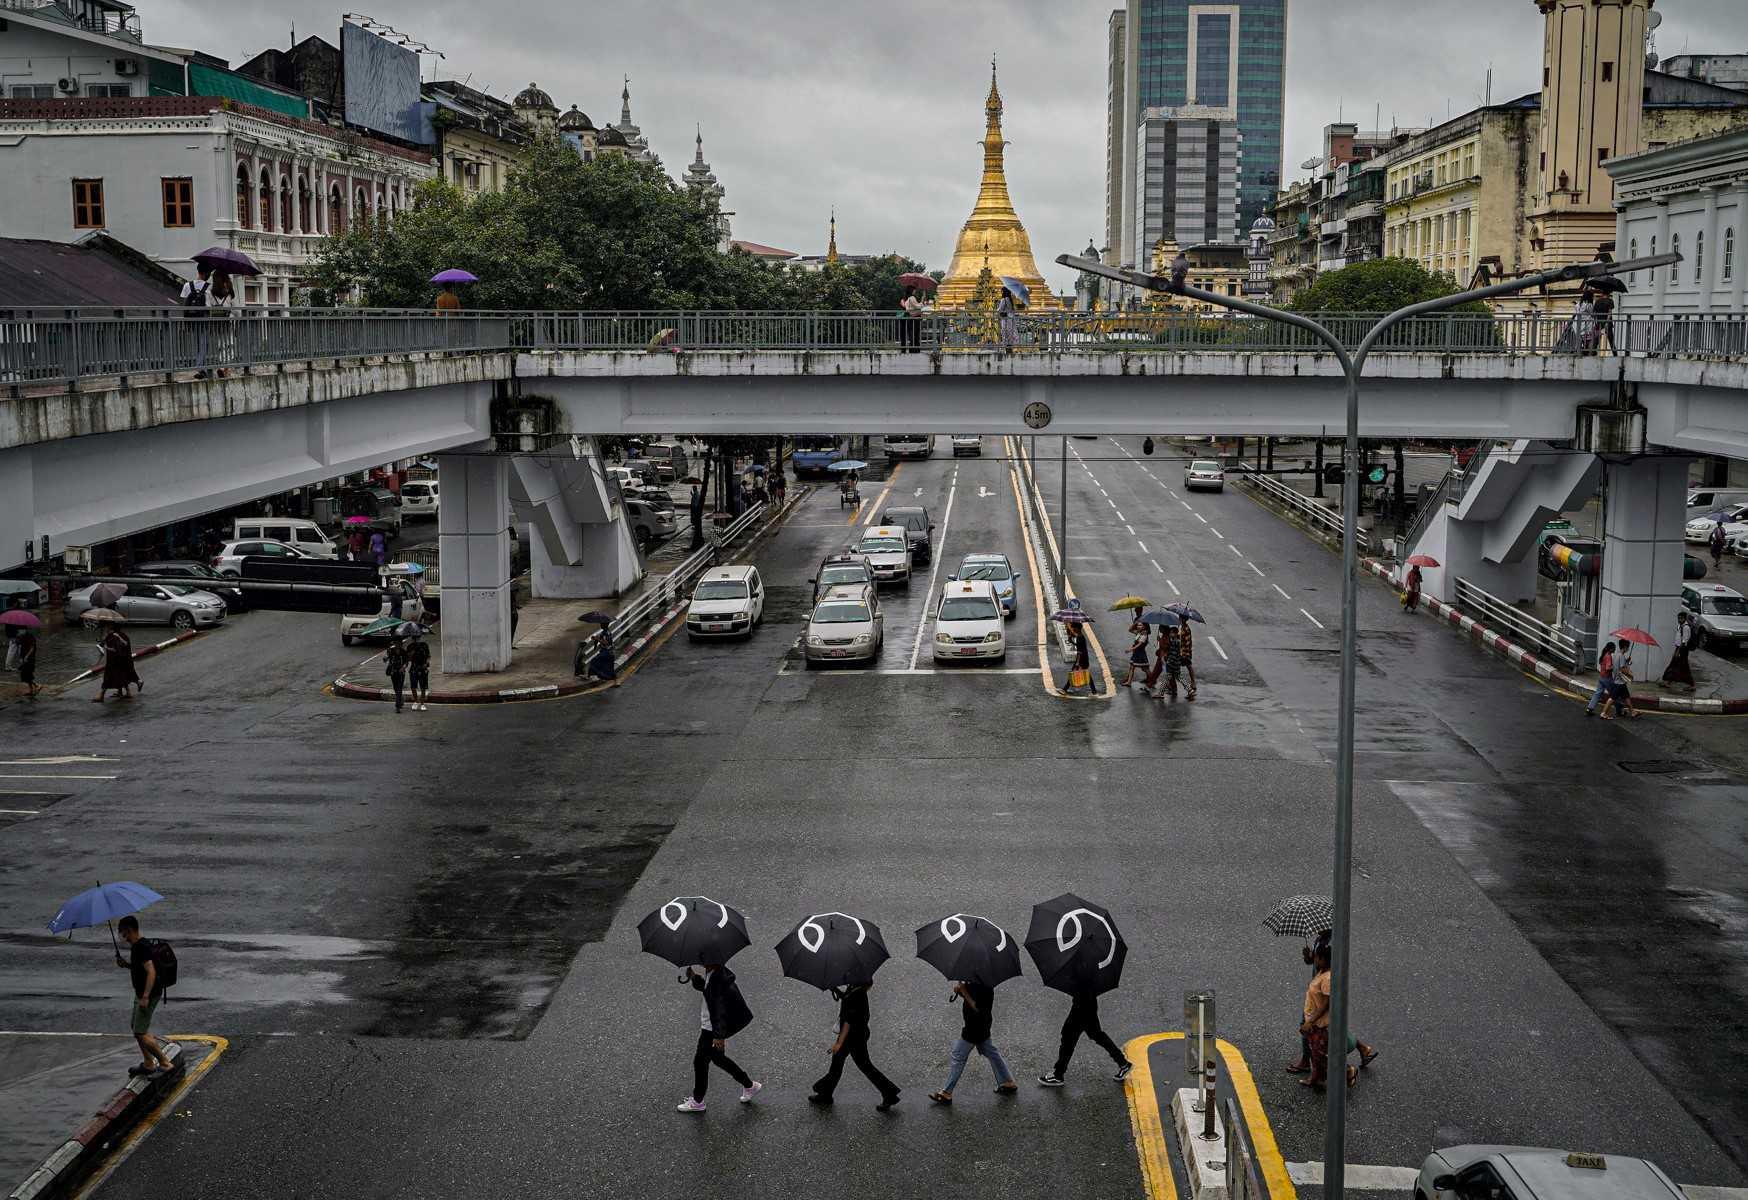 This handout picture taken on Aug 8, 2022, shows protesters walking through Yangon with umbrellas bearing in Burmese the number 8 during a rally. Photo: AFP 